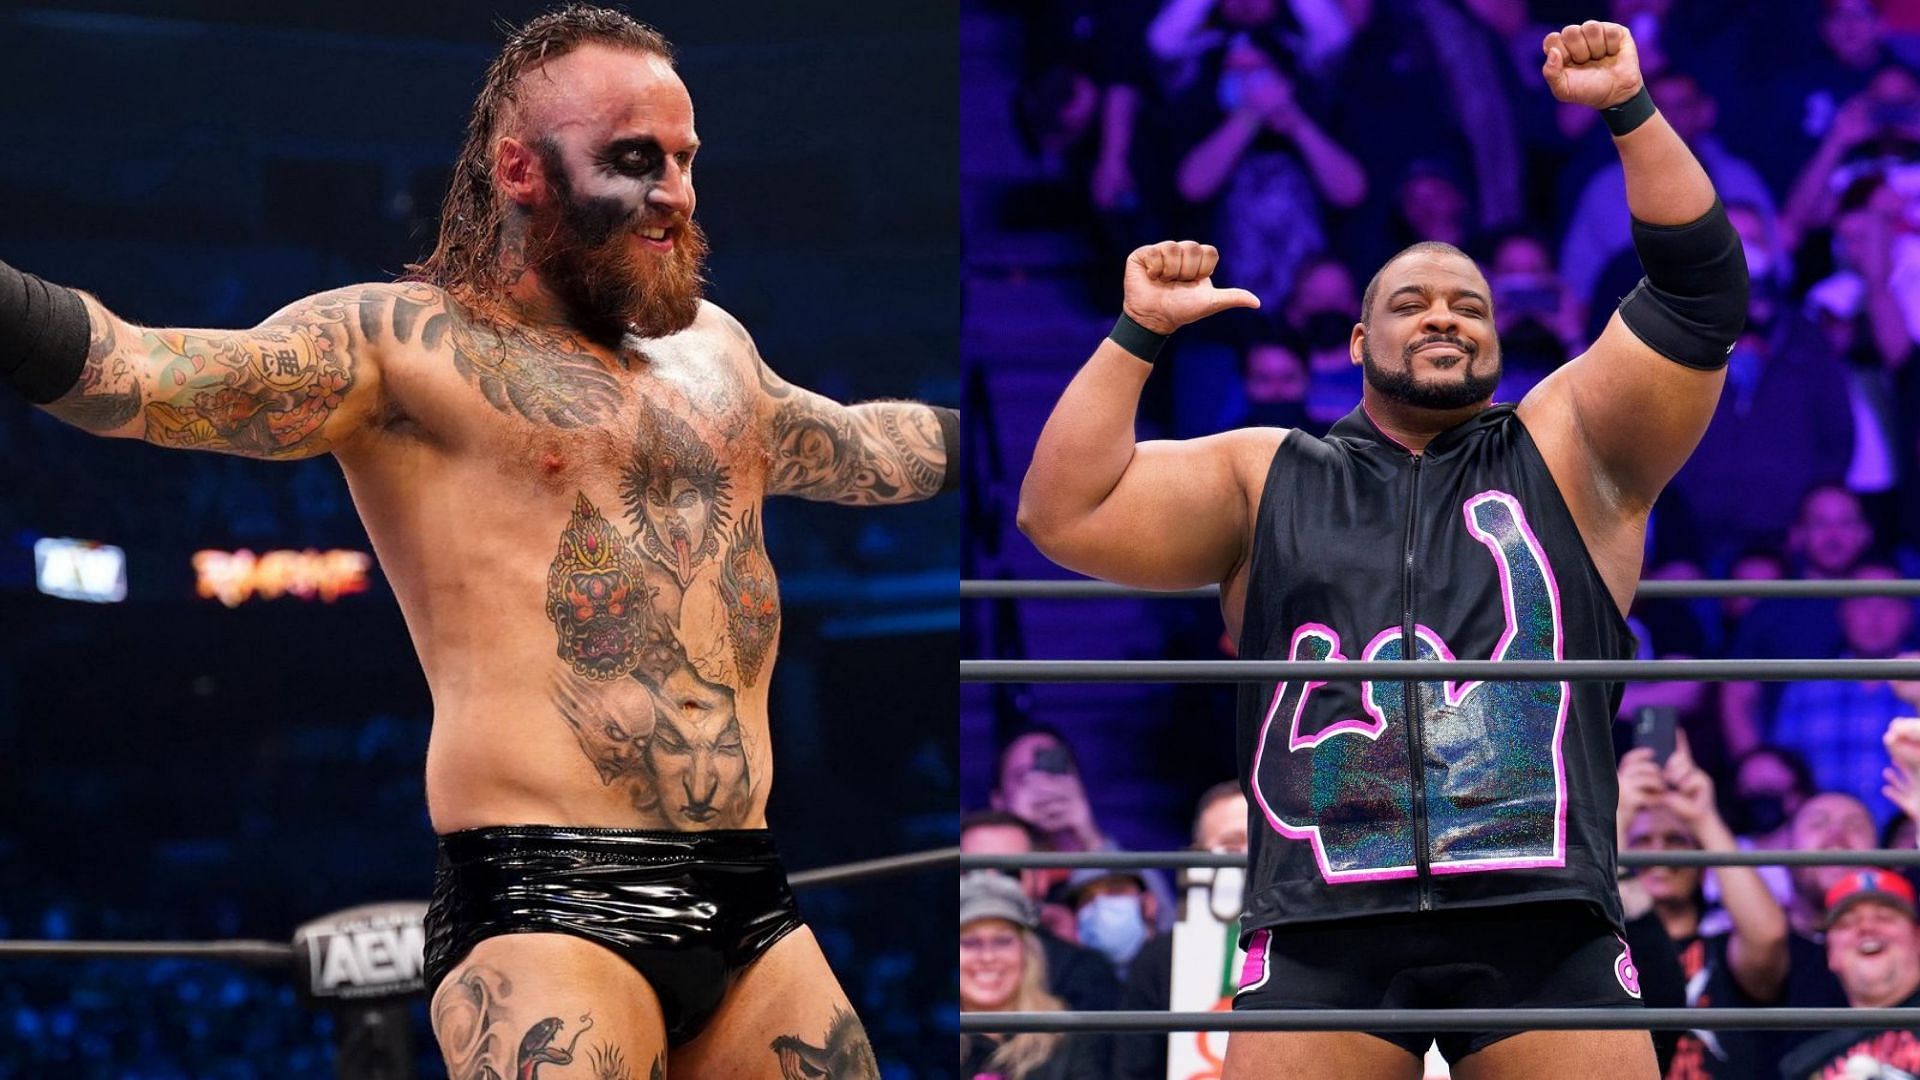 These current AEW wrestlers were previously released WWE superstars